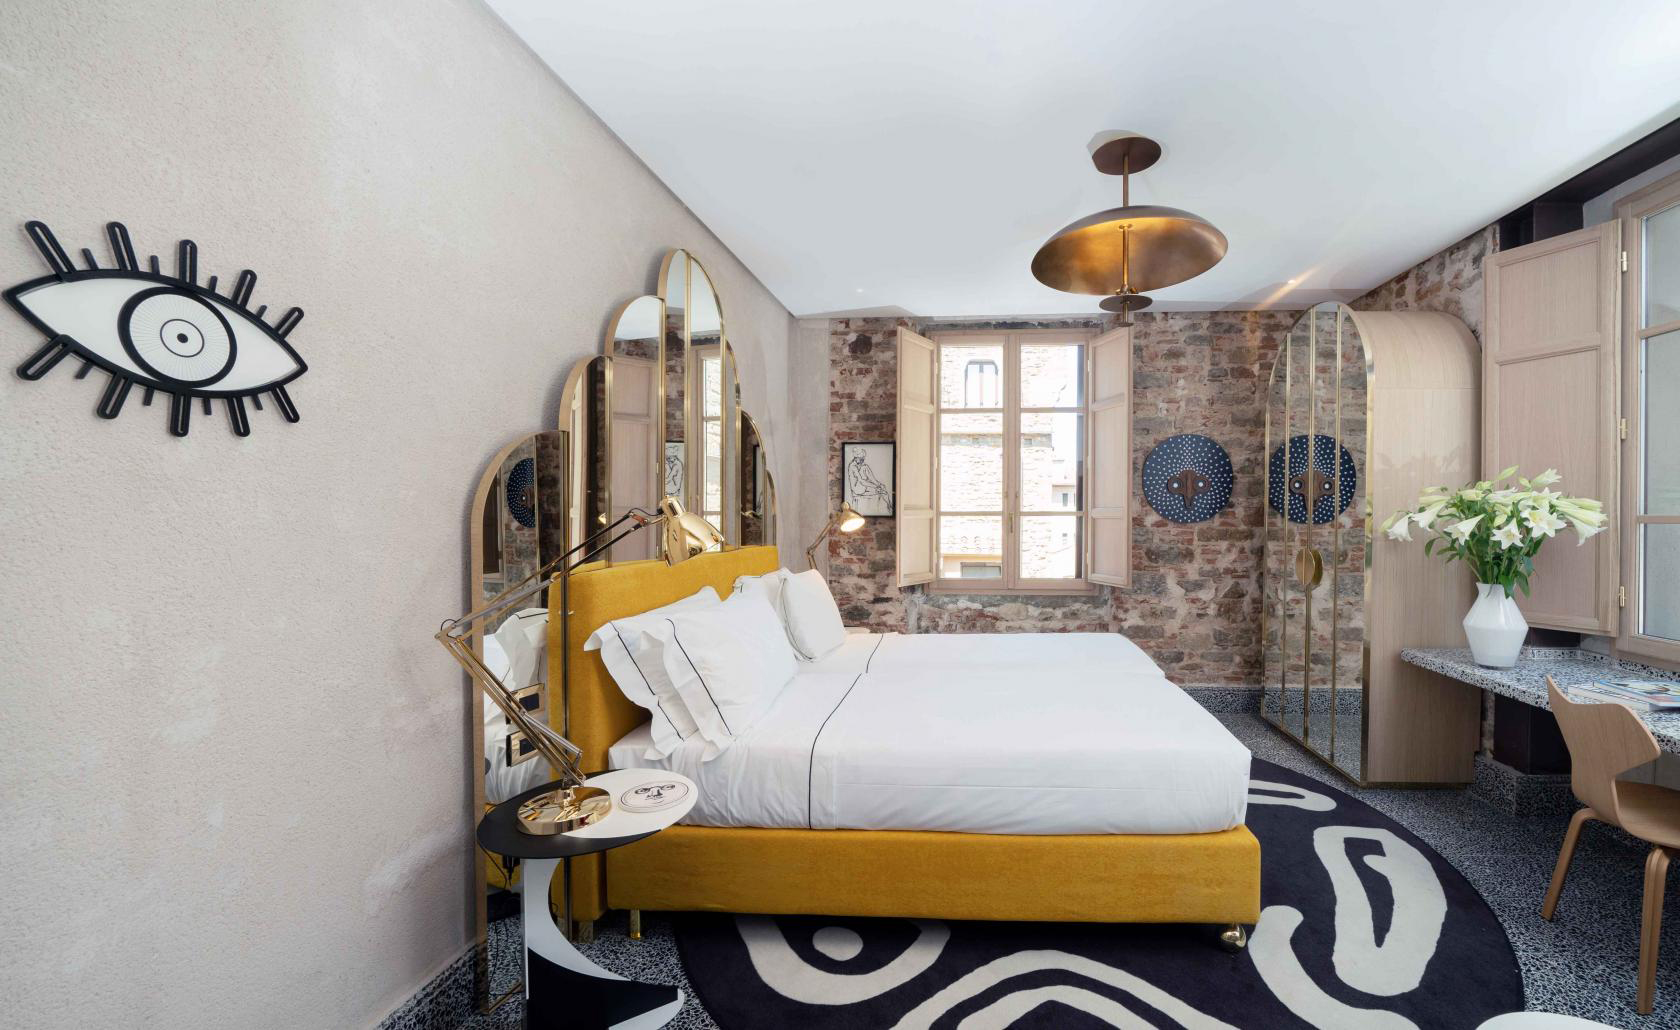 Hotel Calimala in Florence - opening October 2019